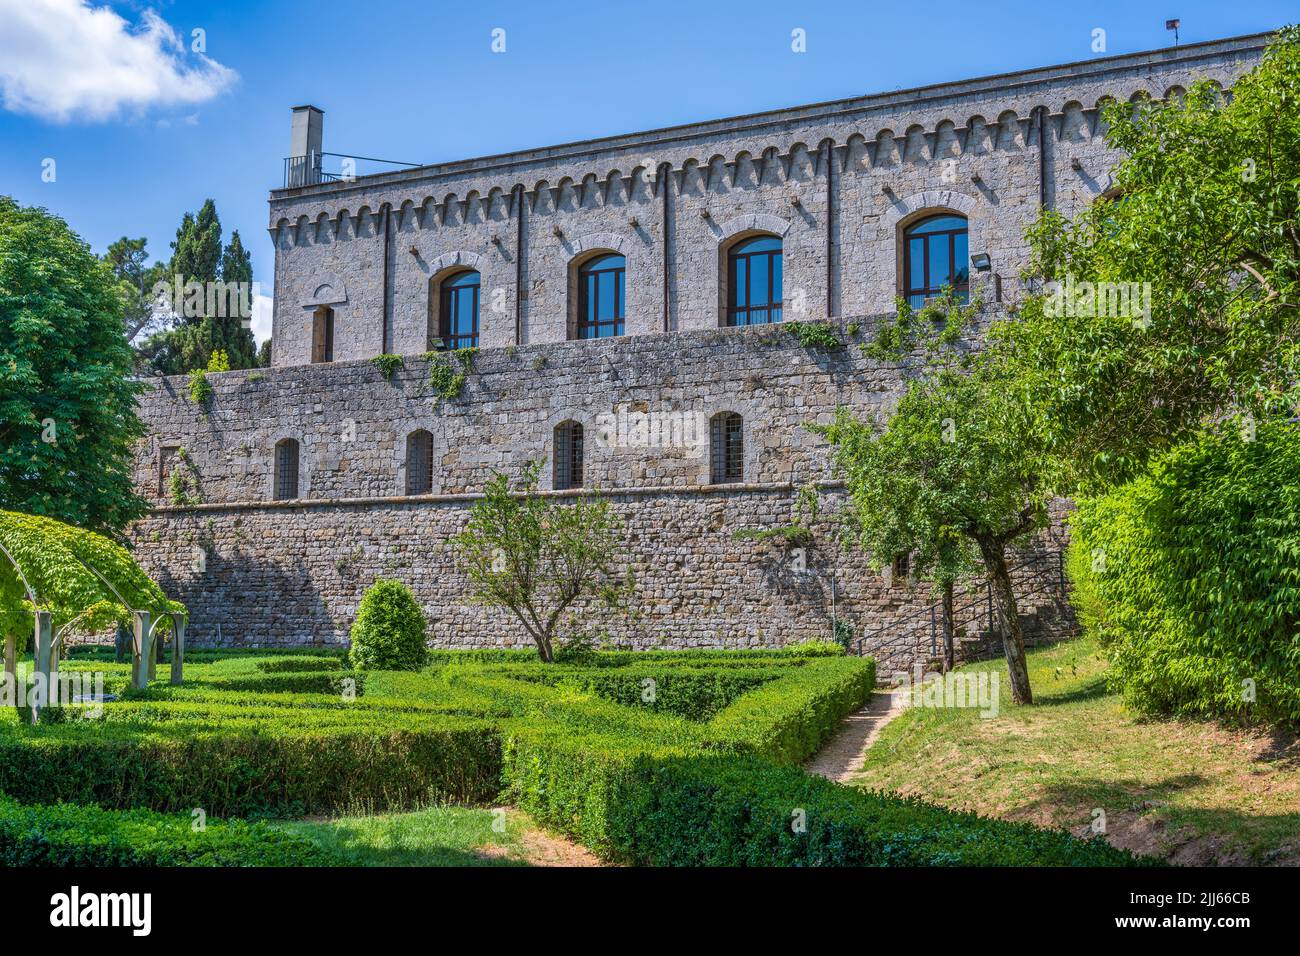 View of the Medici Fortress (Fortezza Medicea) from the public garden in the hilltop town of Montepulciano in Tuscany, Italy Stock Photo